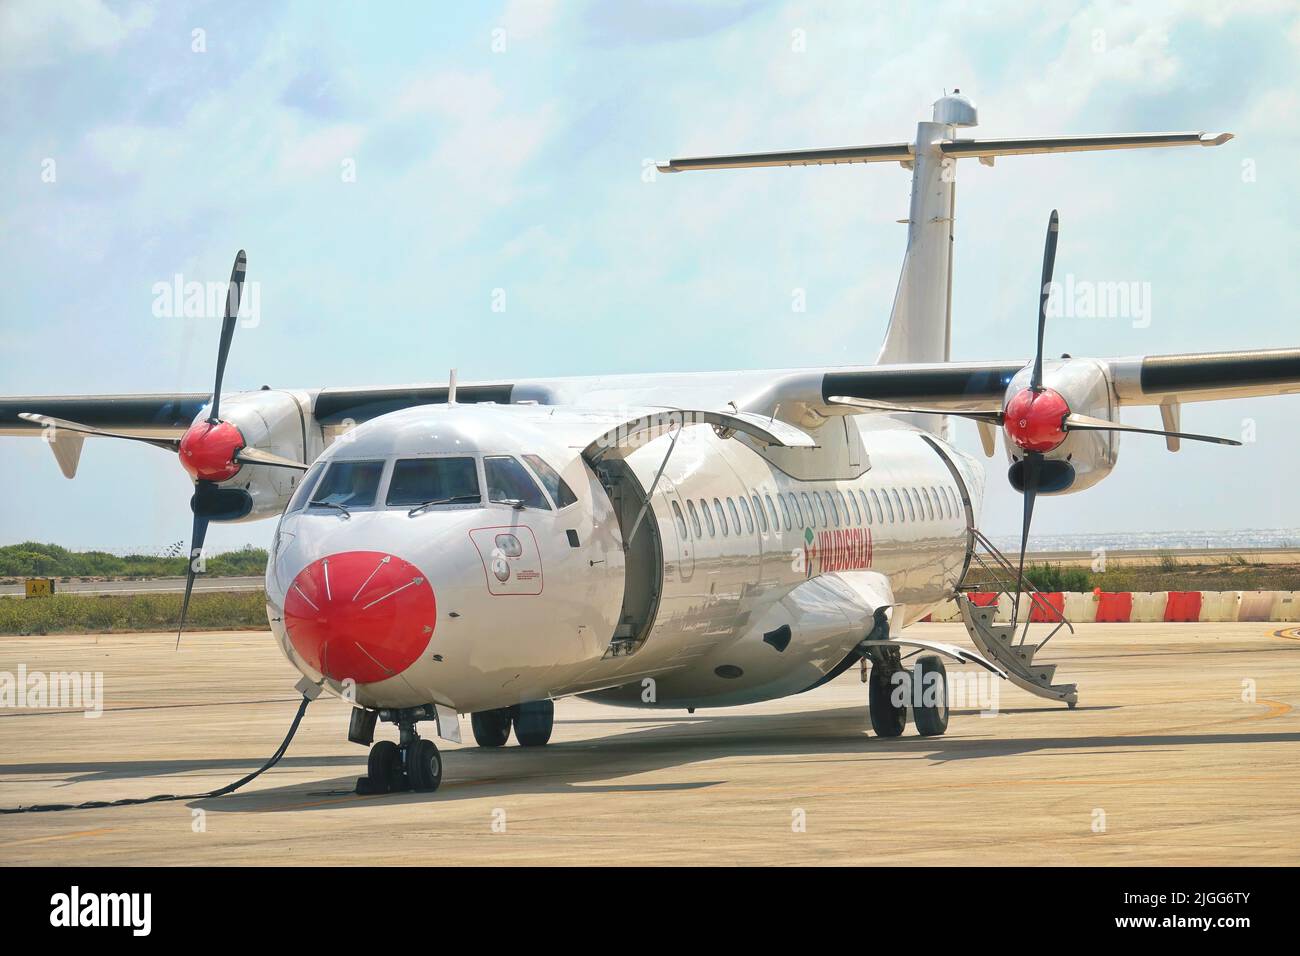 View of a turboprop-engine aircraft stopped at the airport for refueling.  LAMPEDUSA, ITALY - AUGUST, 2019 Stock Photo